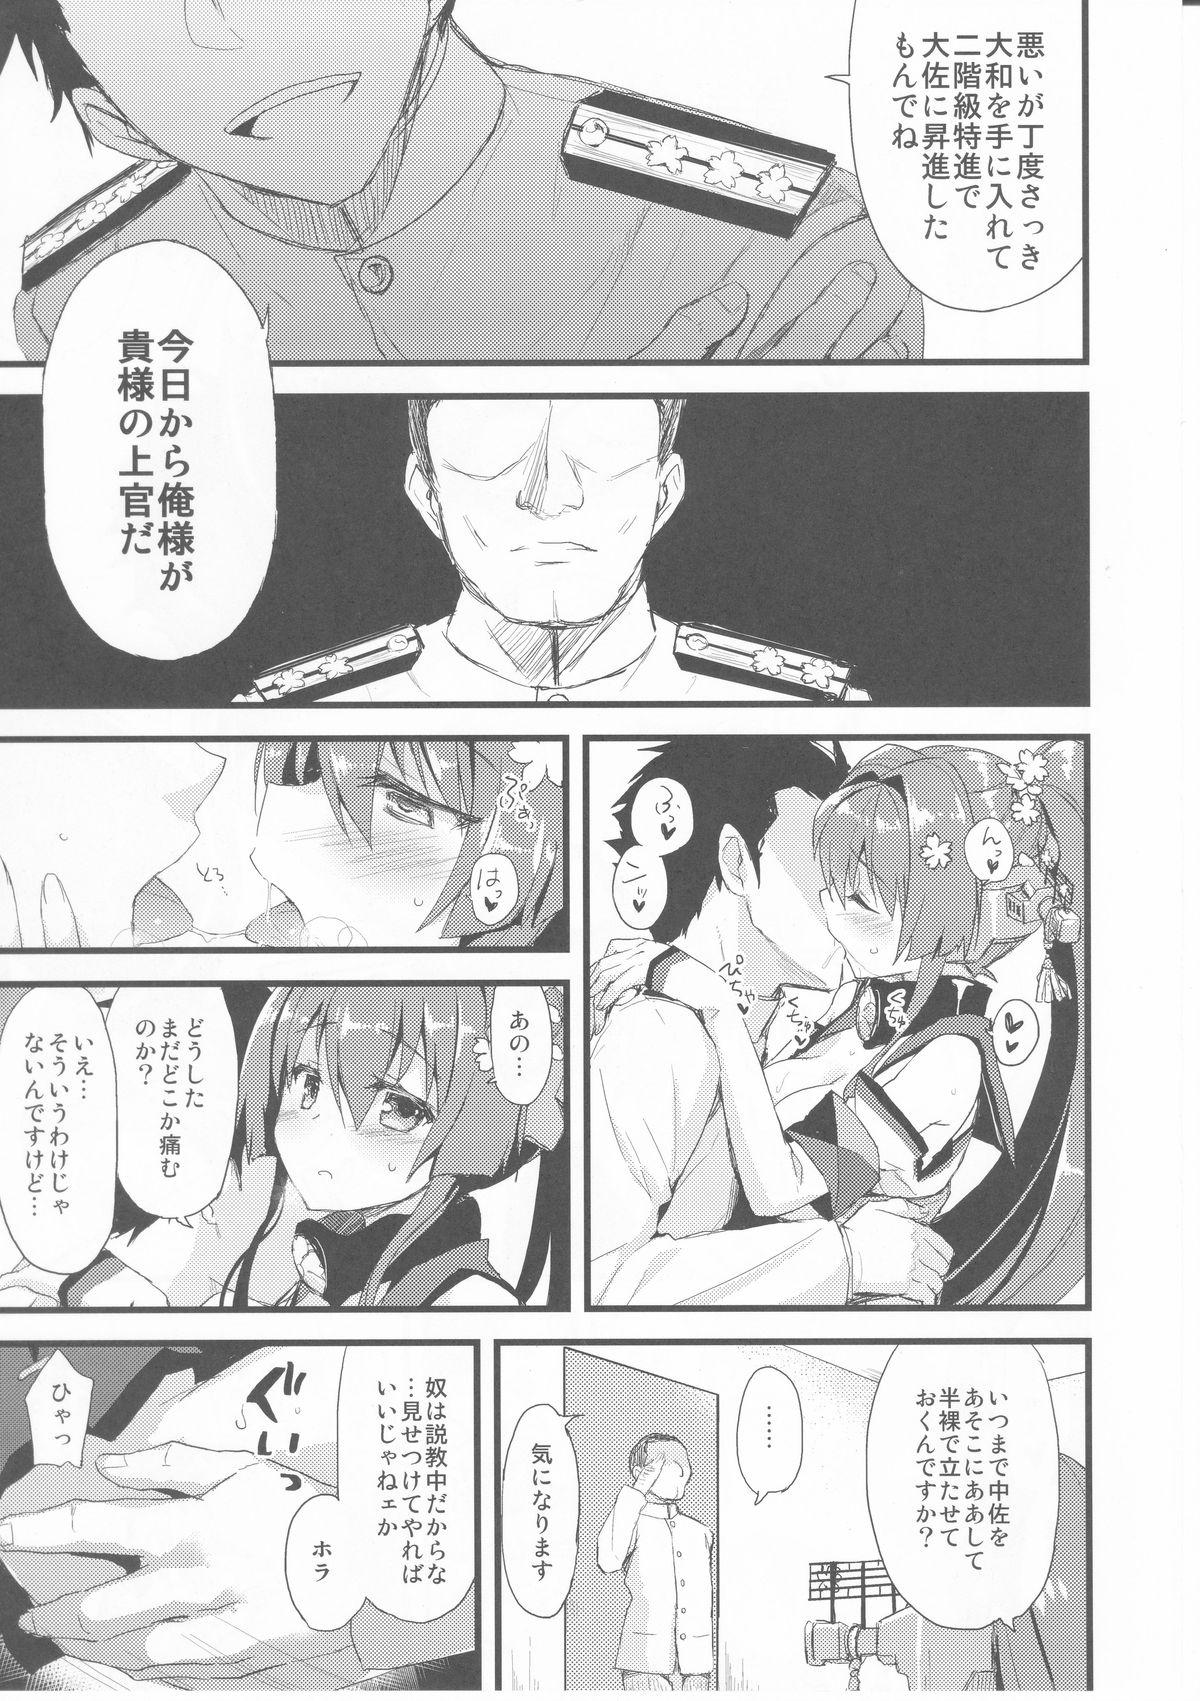 Foot Worship Ai to Yokubou no MMTWTFF - Kantai collection Picked Up - Page 12